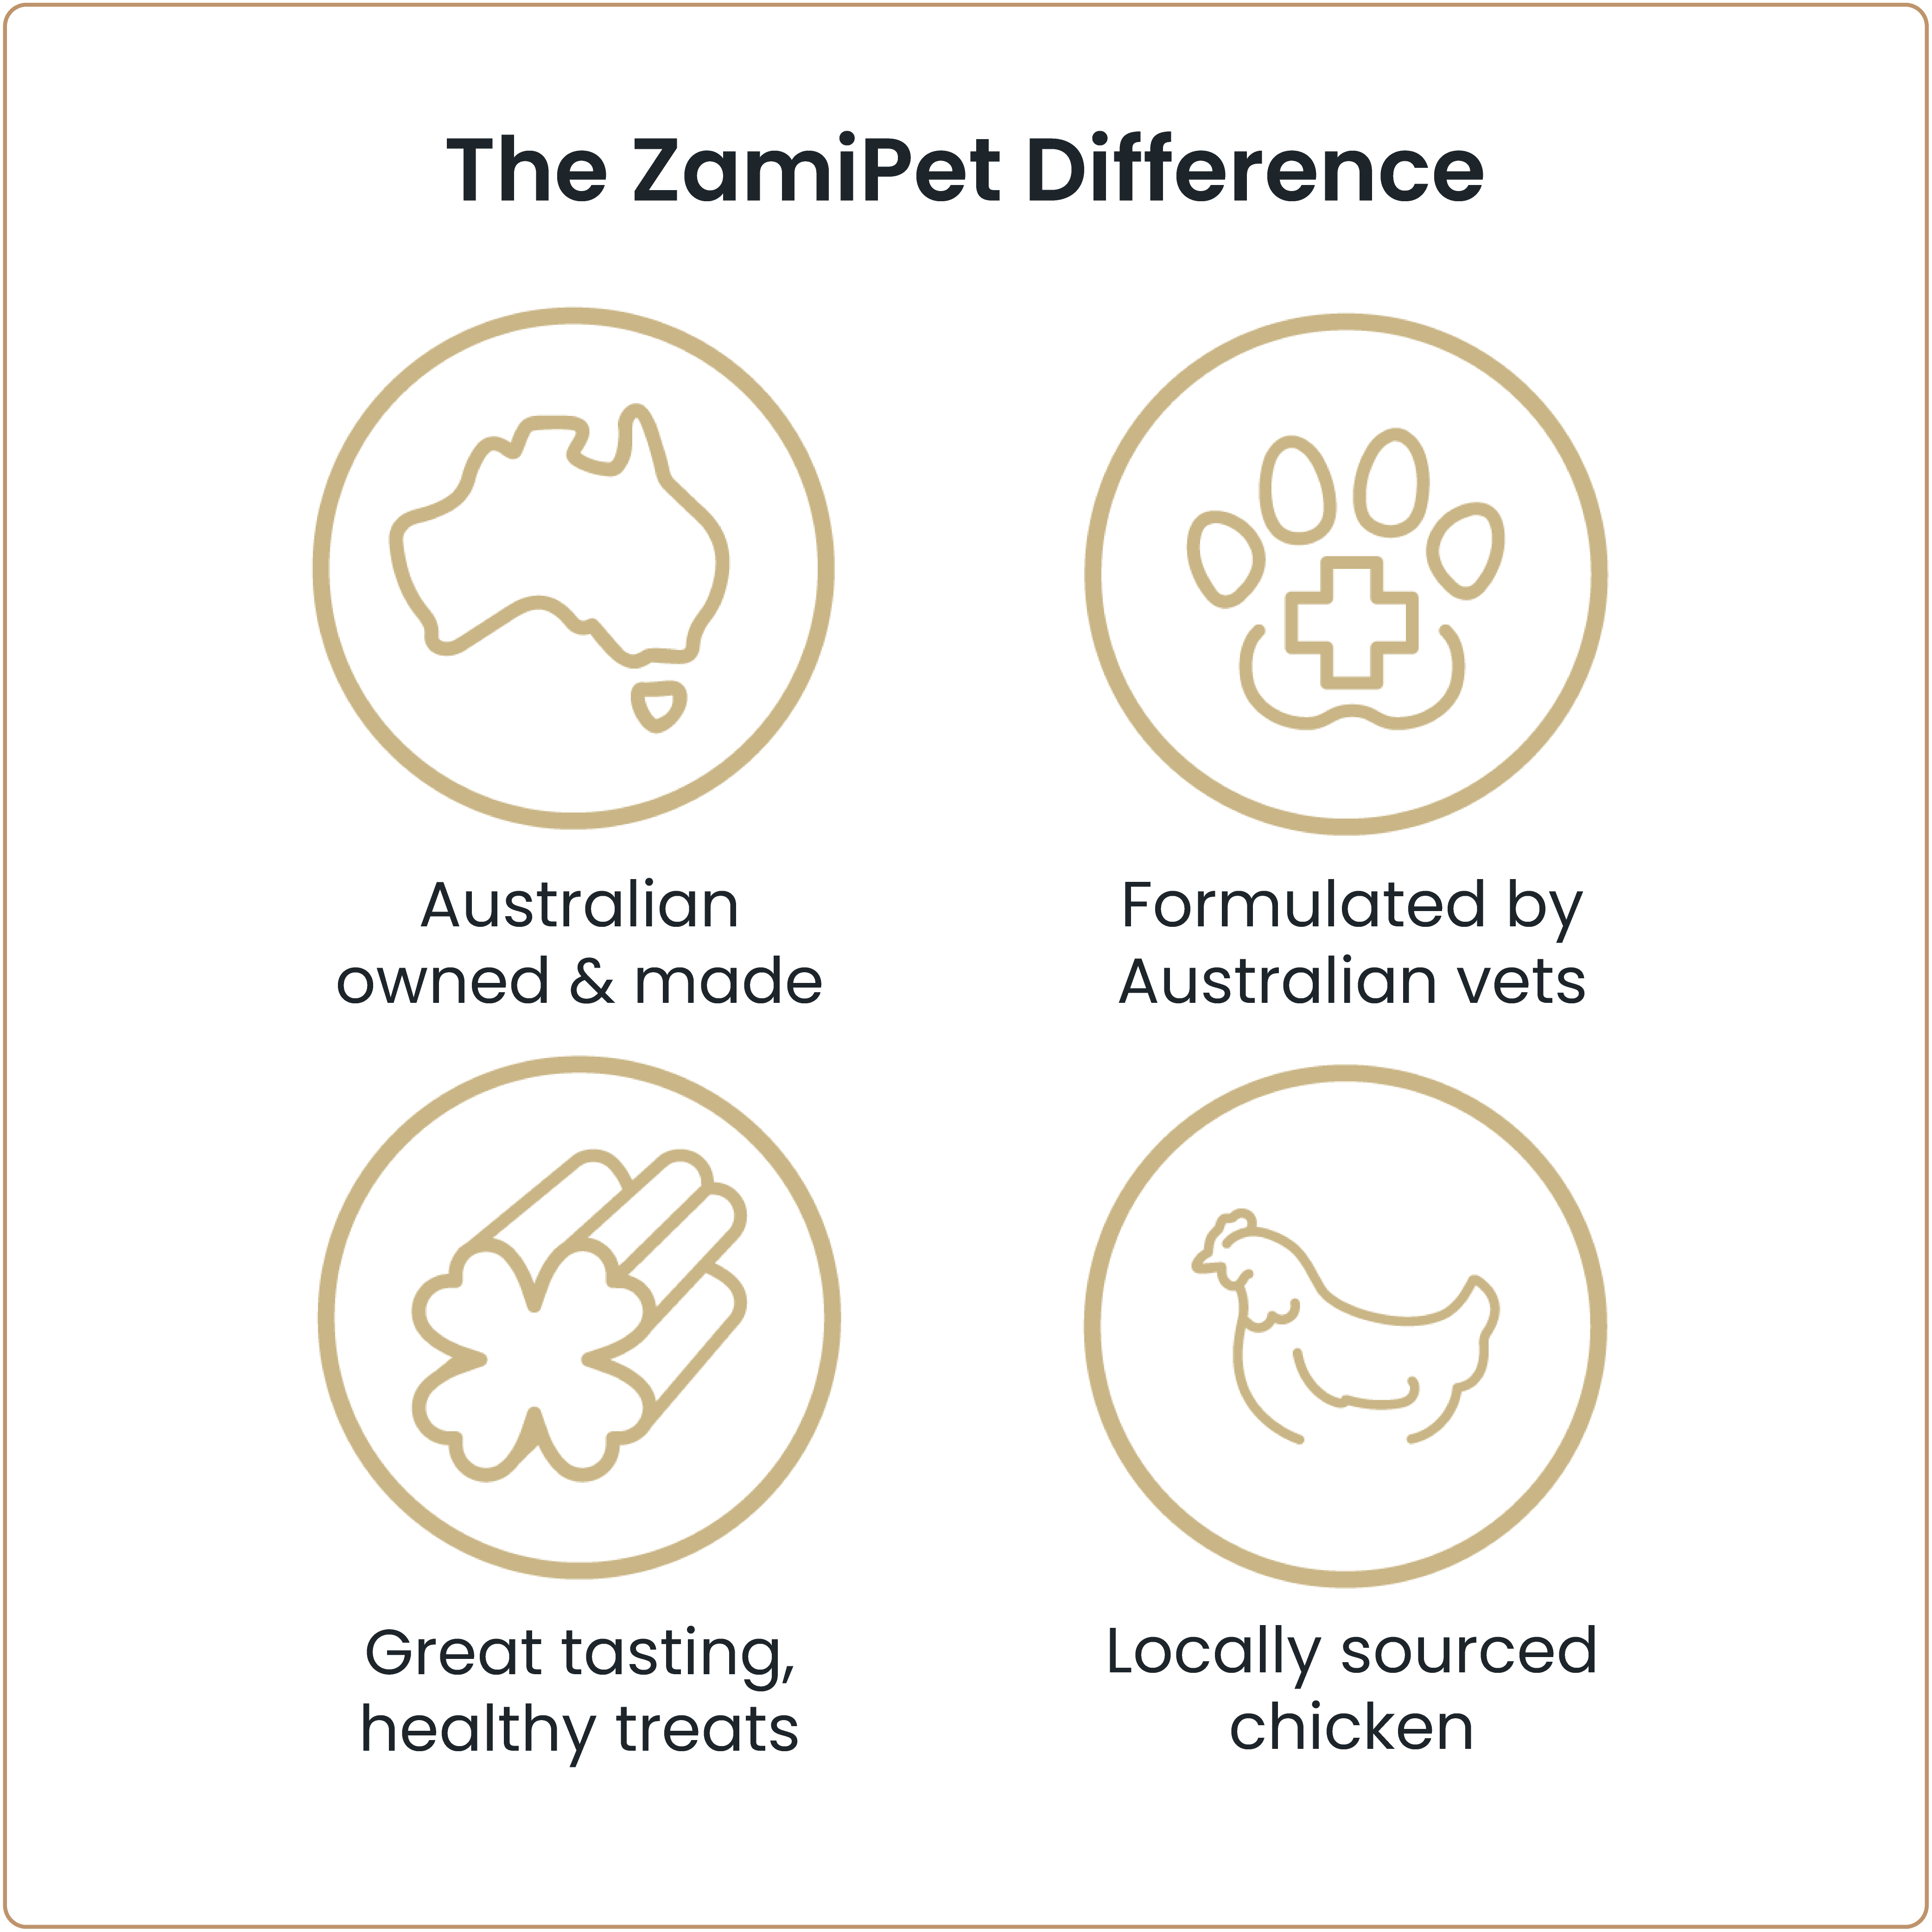 The ZamiPet Difference: Australian made & owned, Formulated by Australian Vets, Great tasting healthy treats, made with locally sourced chicken.